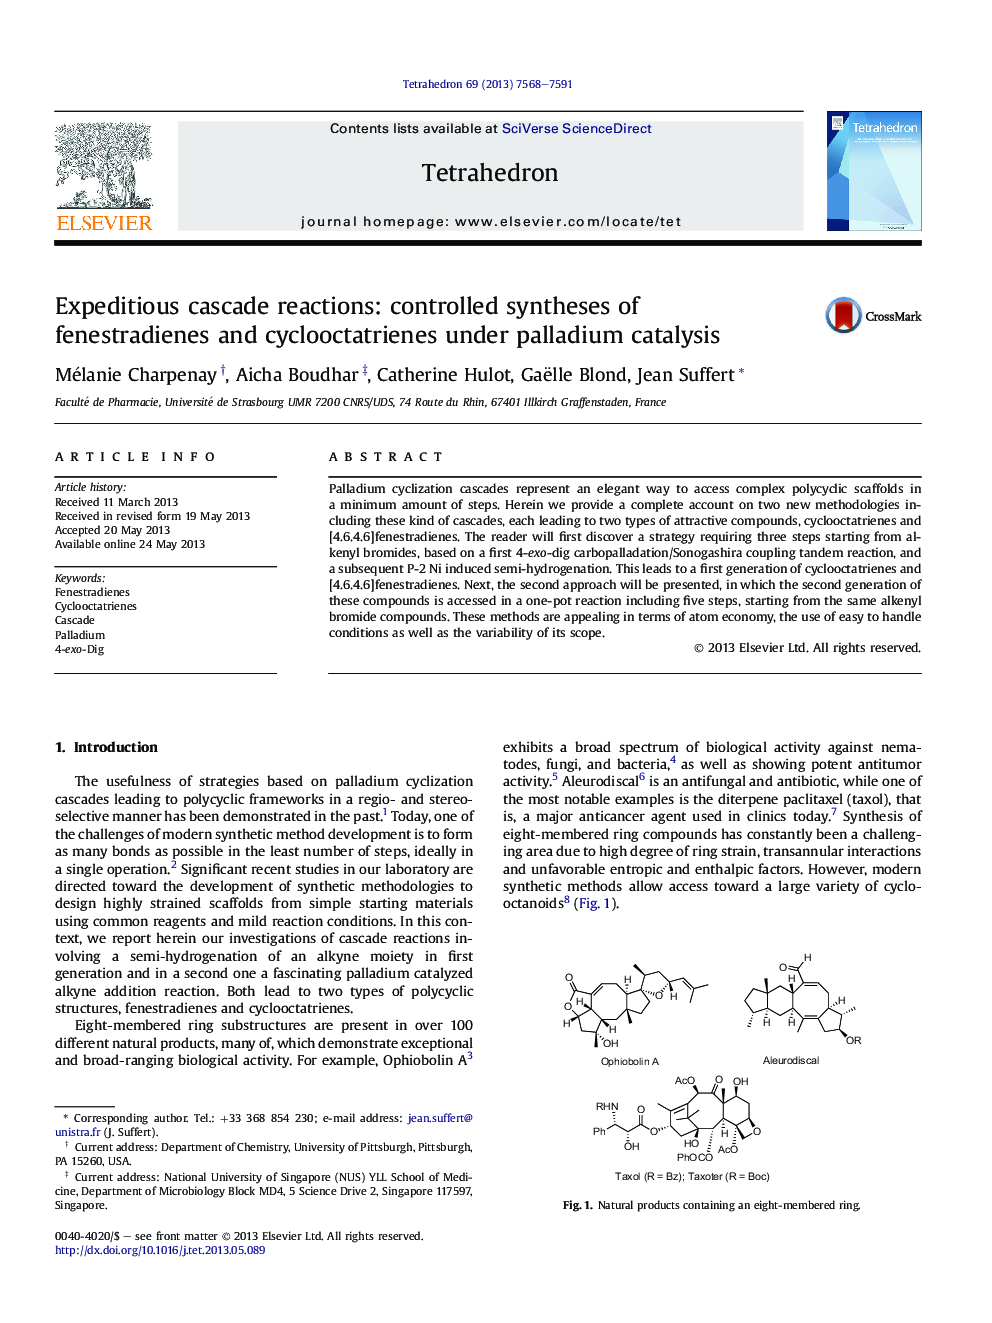 Expeditious cascade reactions: controlled syntheses of fenestradienes and cyclooctatrienes under palladium catalysis